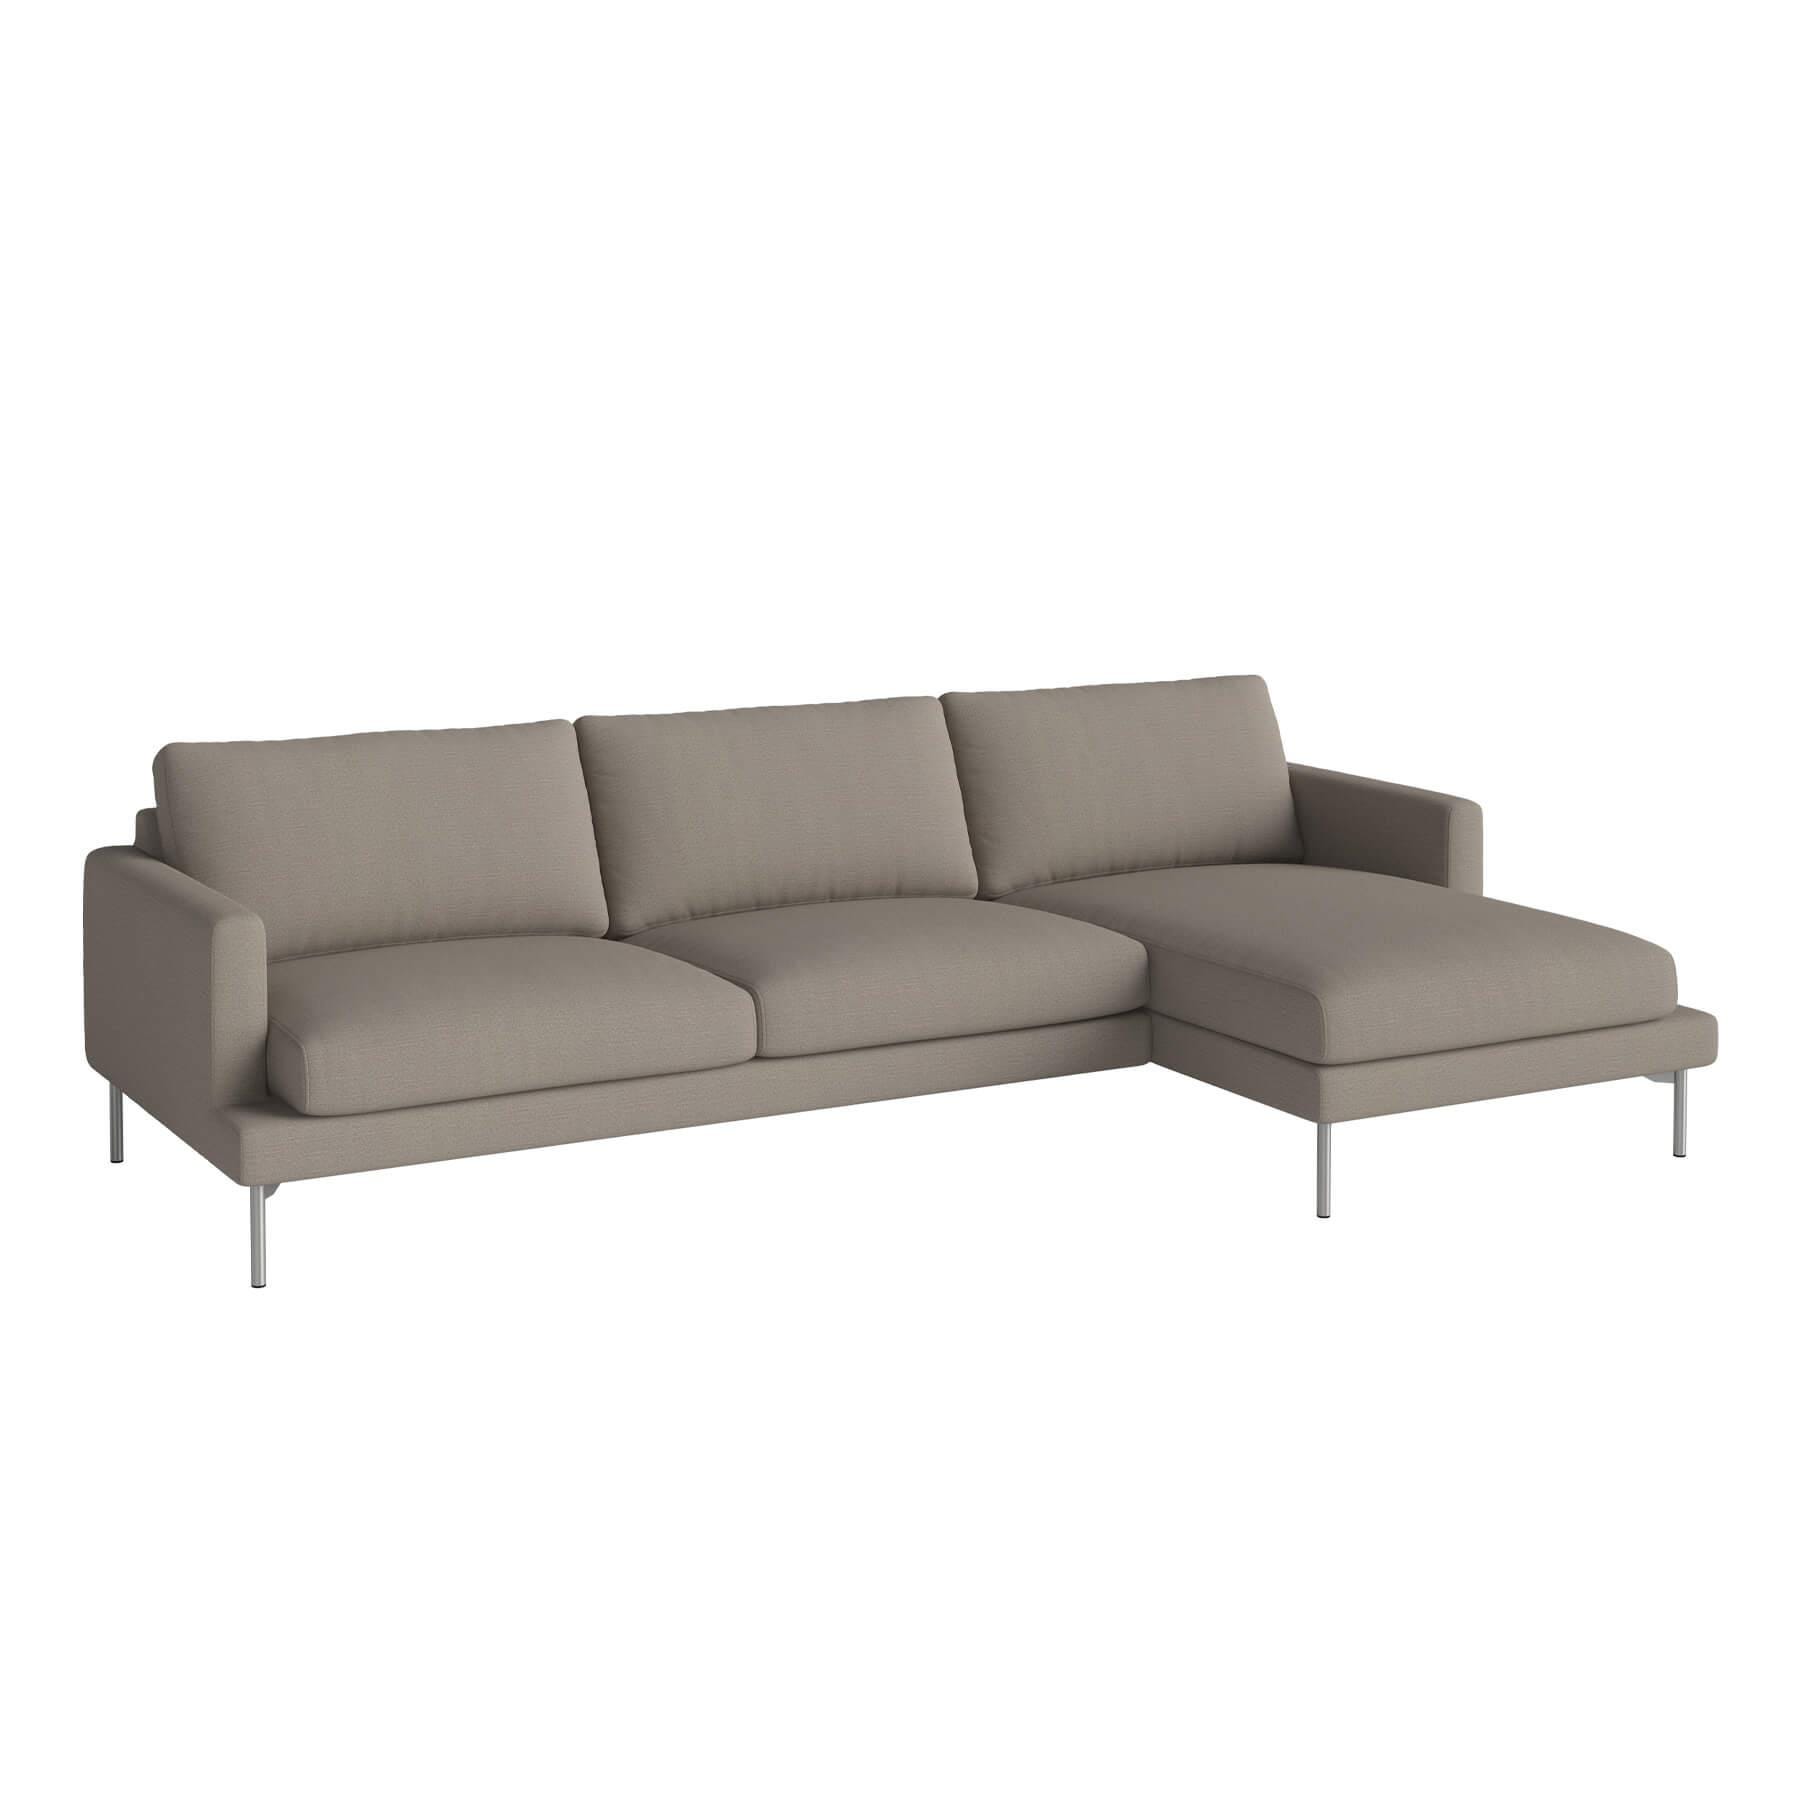 Bolia Veneda Sofa 35 Seater Sofa With Chaise Longue Brushed Steel Baize Dark Beige Right Brown Designer Furniture From Holloways Of Ludlow